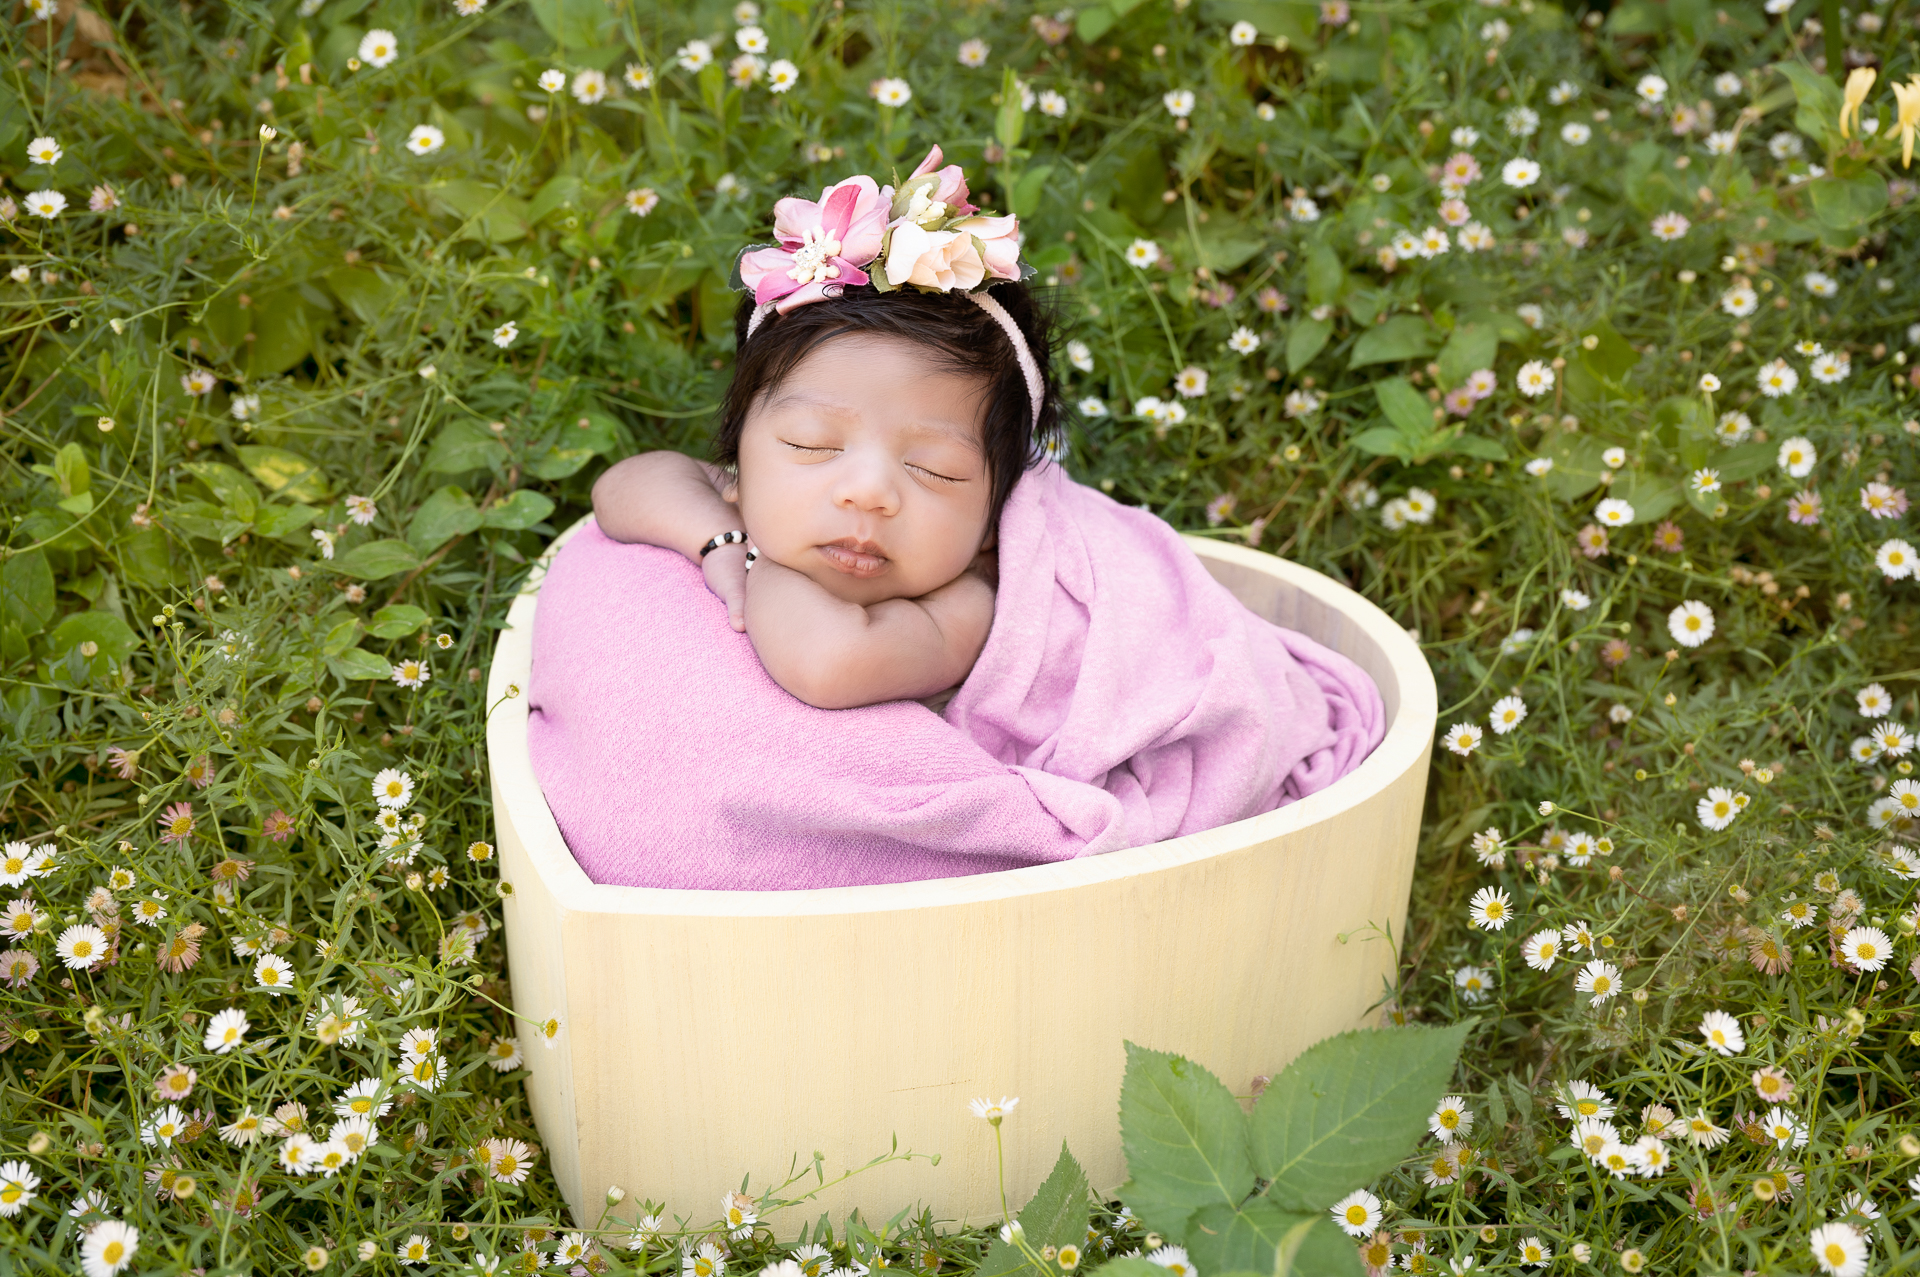 Newborn girl rests on heart shaped prop outdoors surrounded by margarita flowers. Pink blanket & headband.